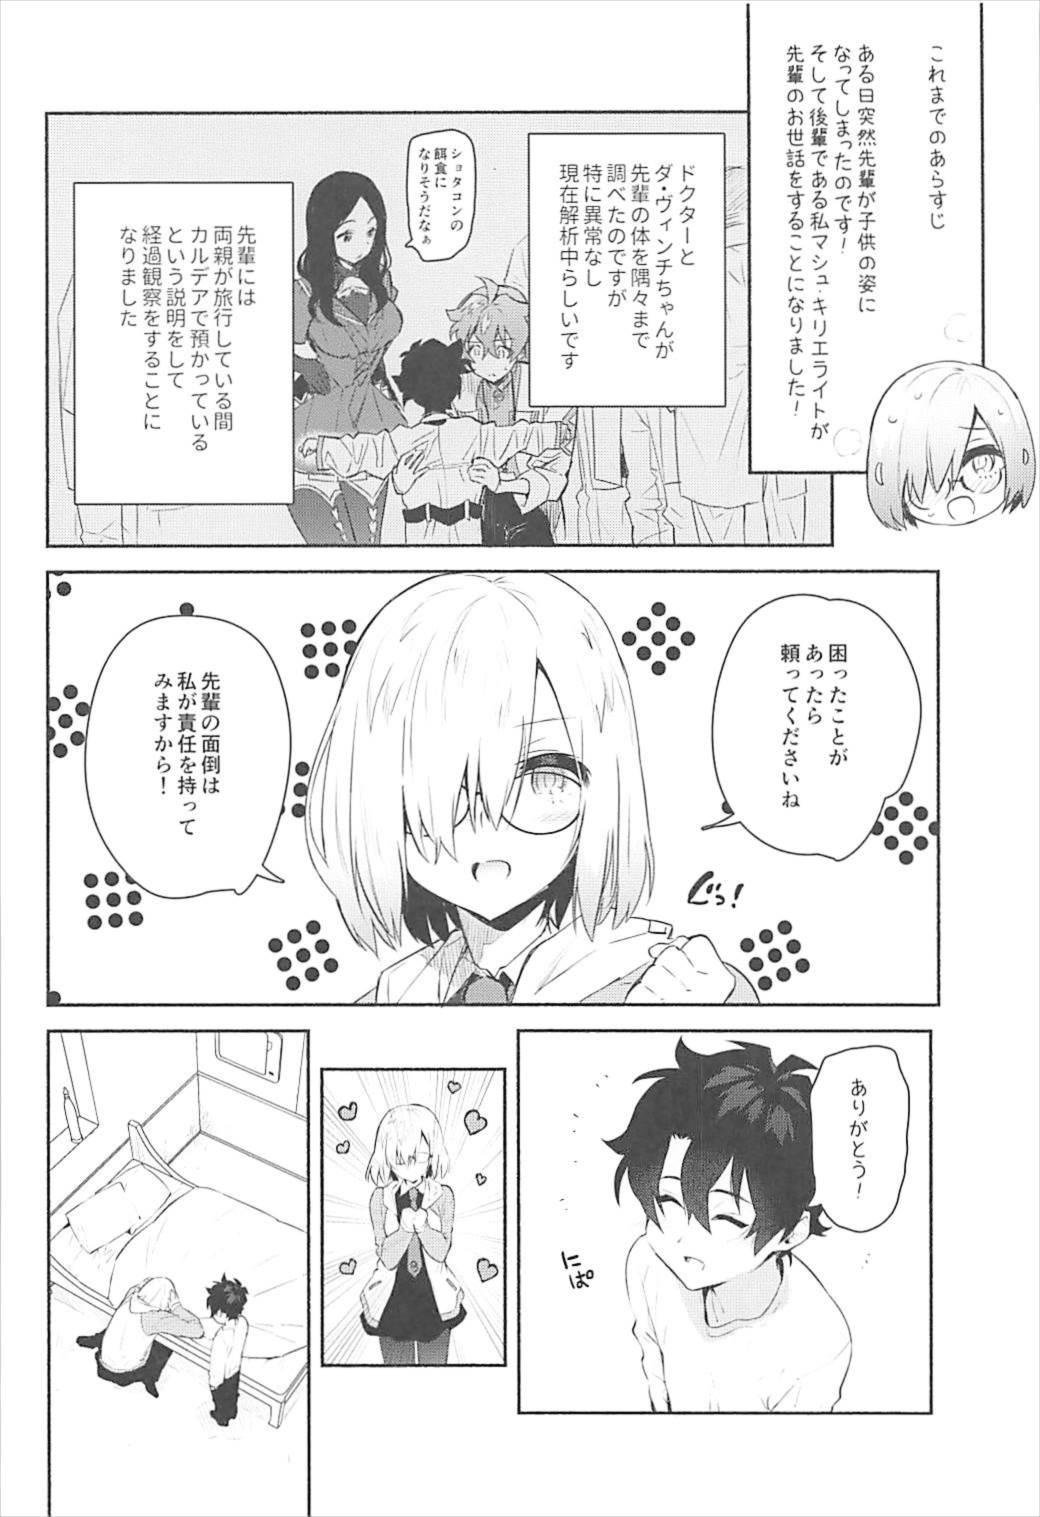 Socks Mash to Issho - Fate grand order Sexo - Page 5